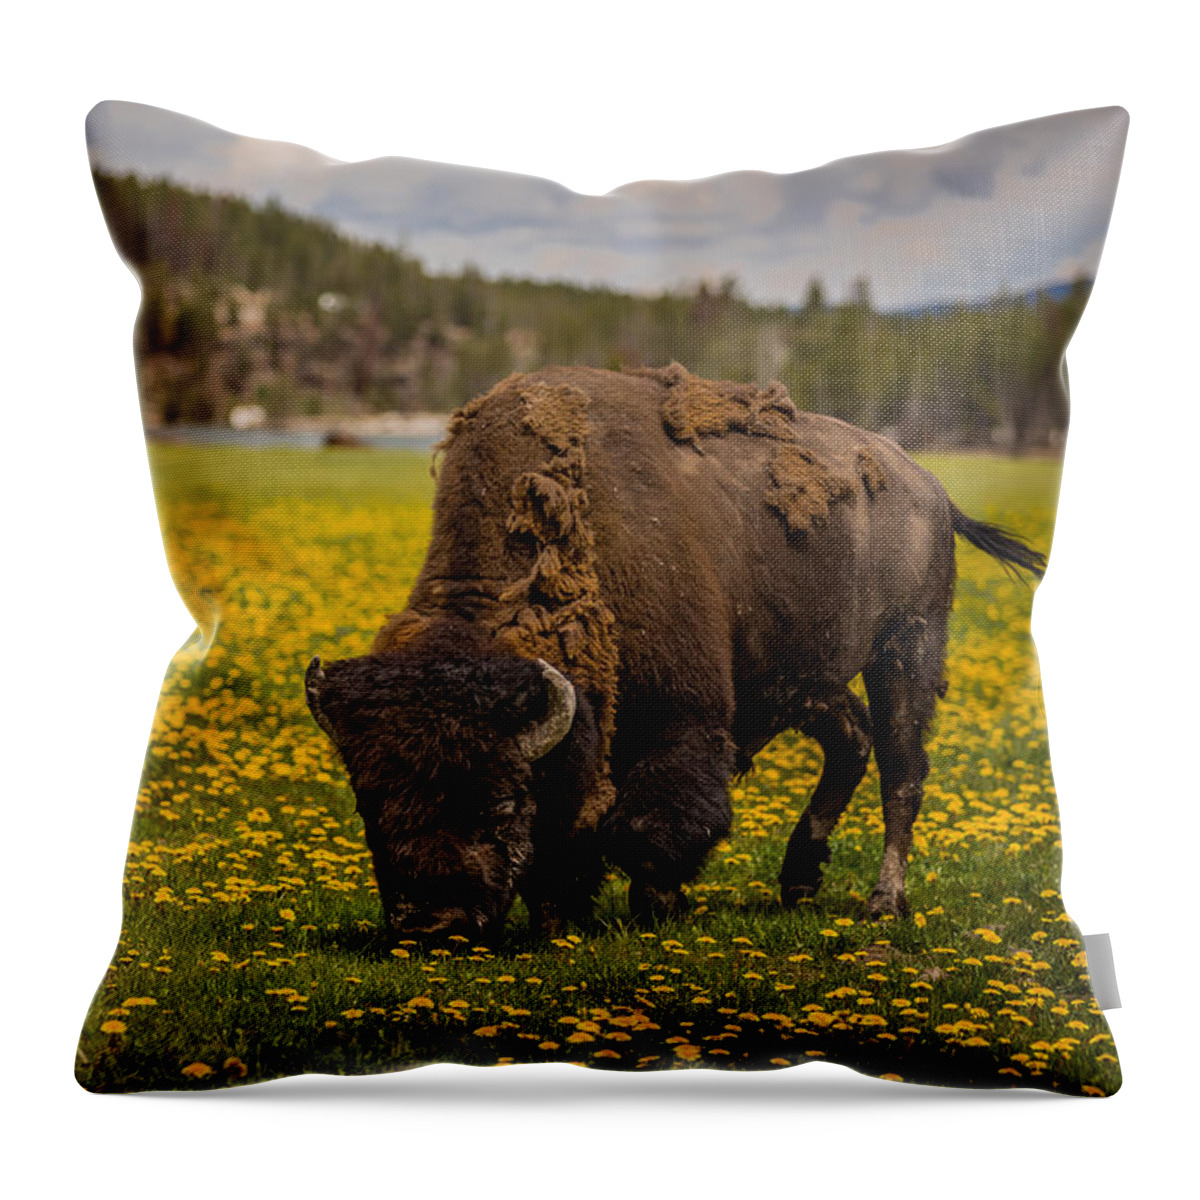 Love Throw Pillow featuring the photograph American Bison by Gary Migues